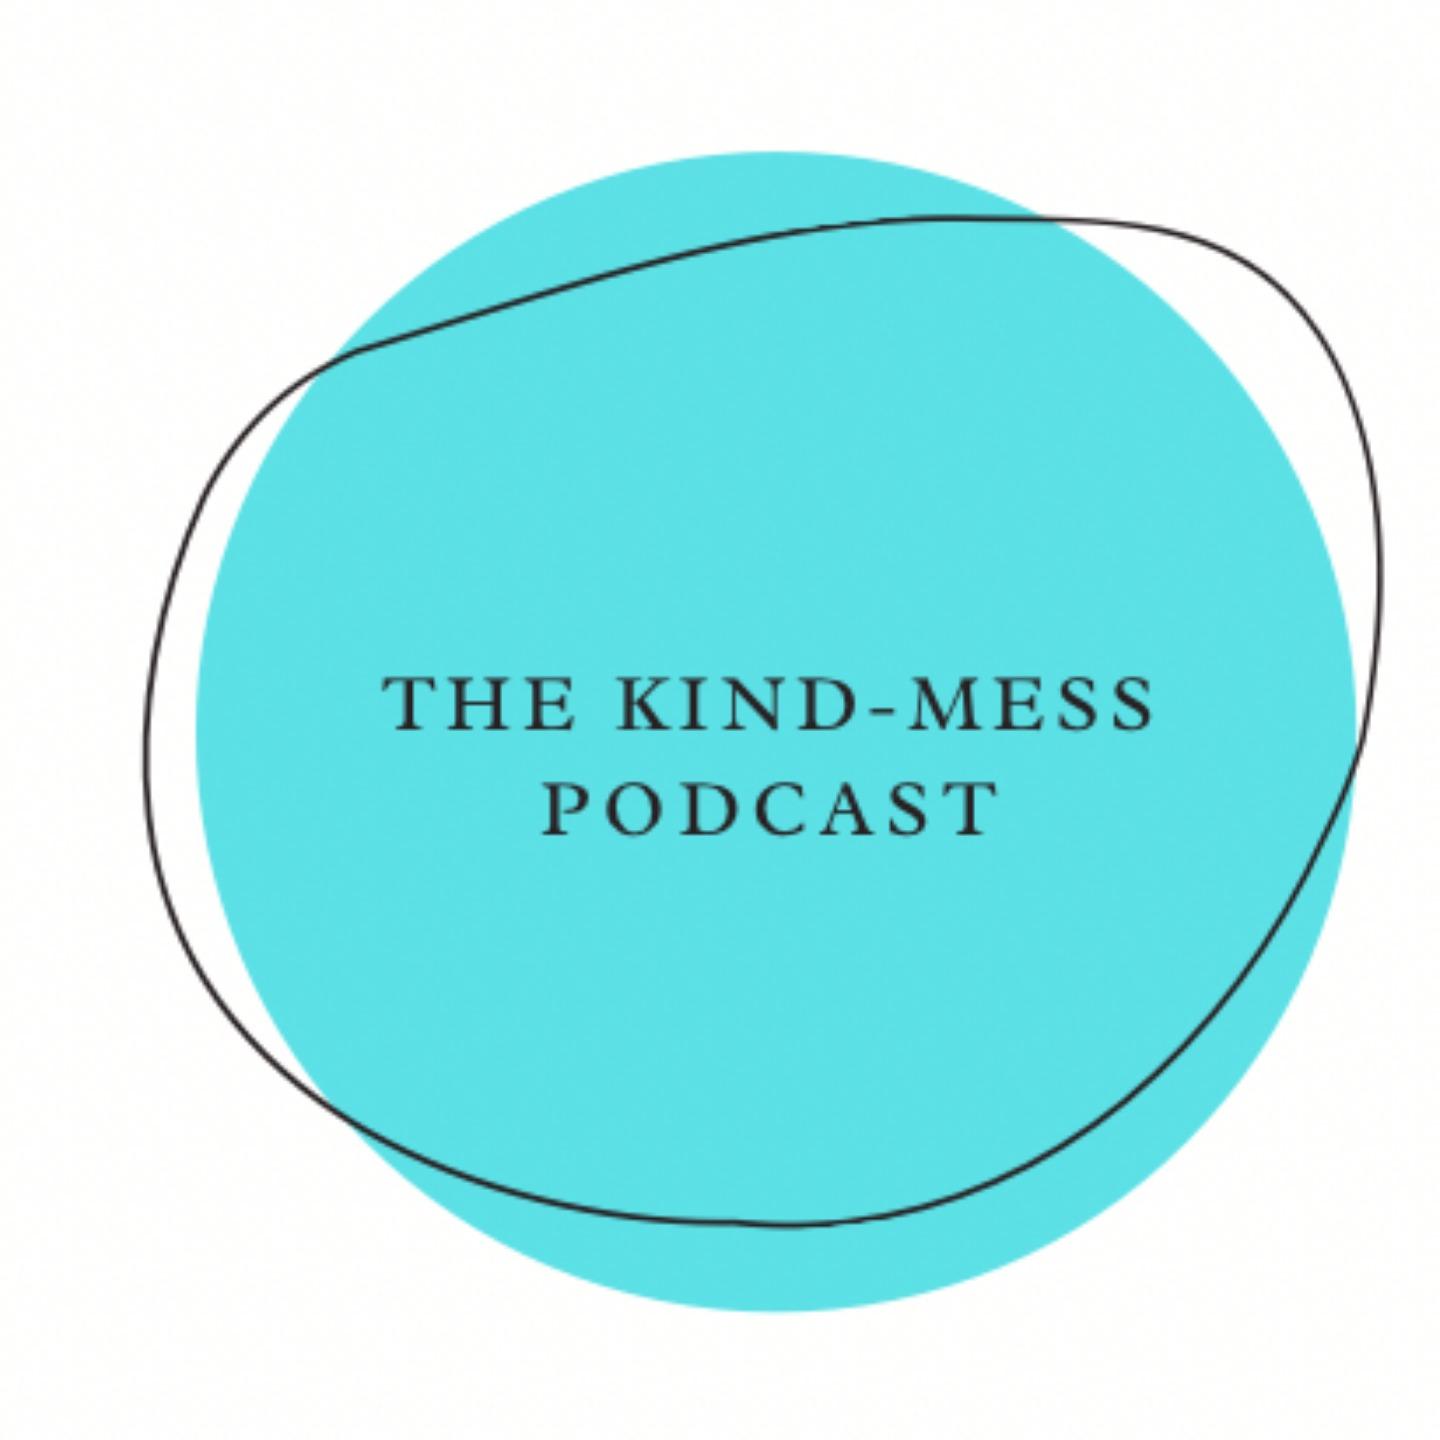 The Kind-Mess Podcast